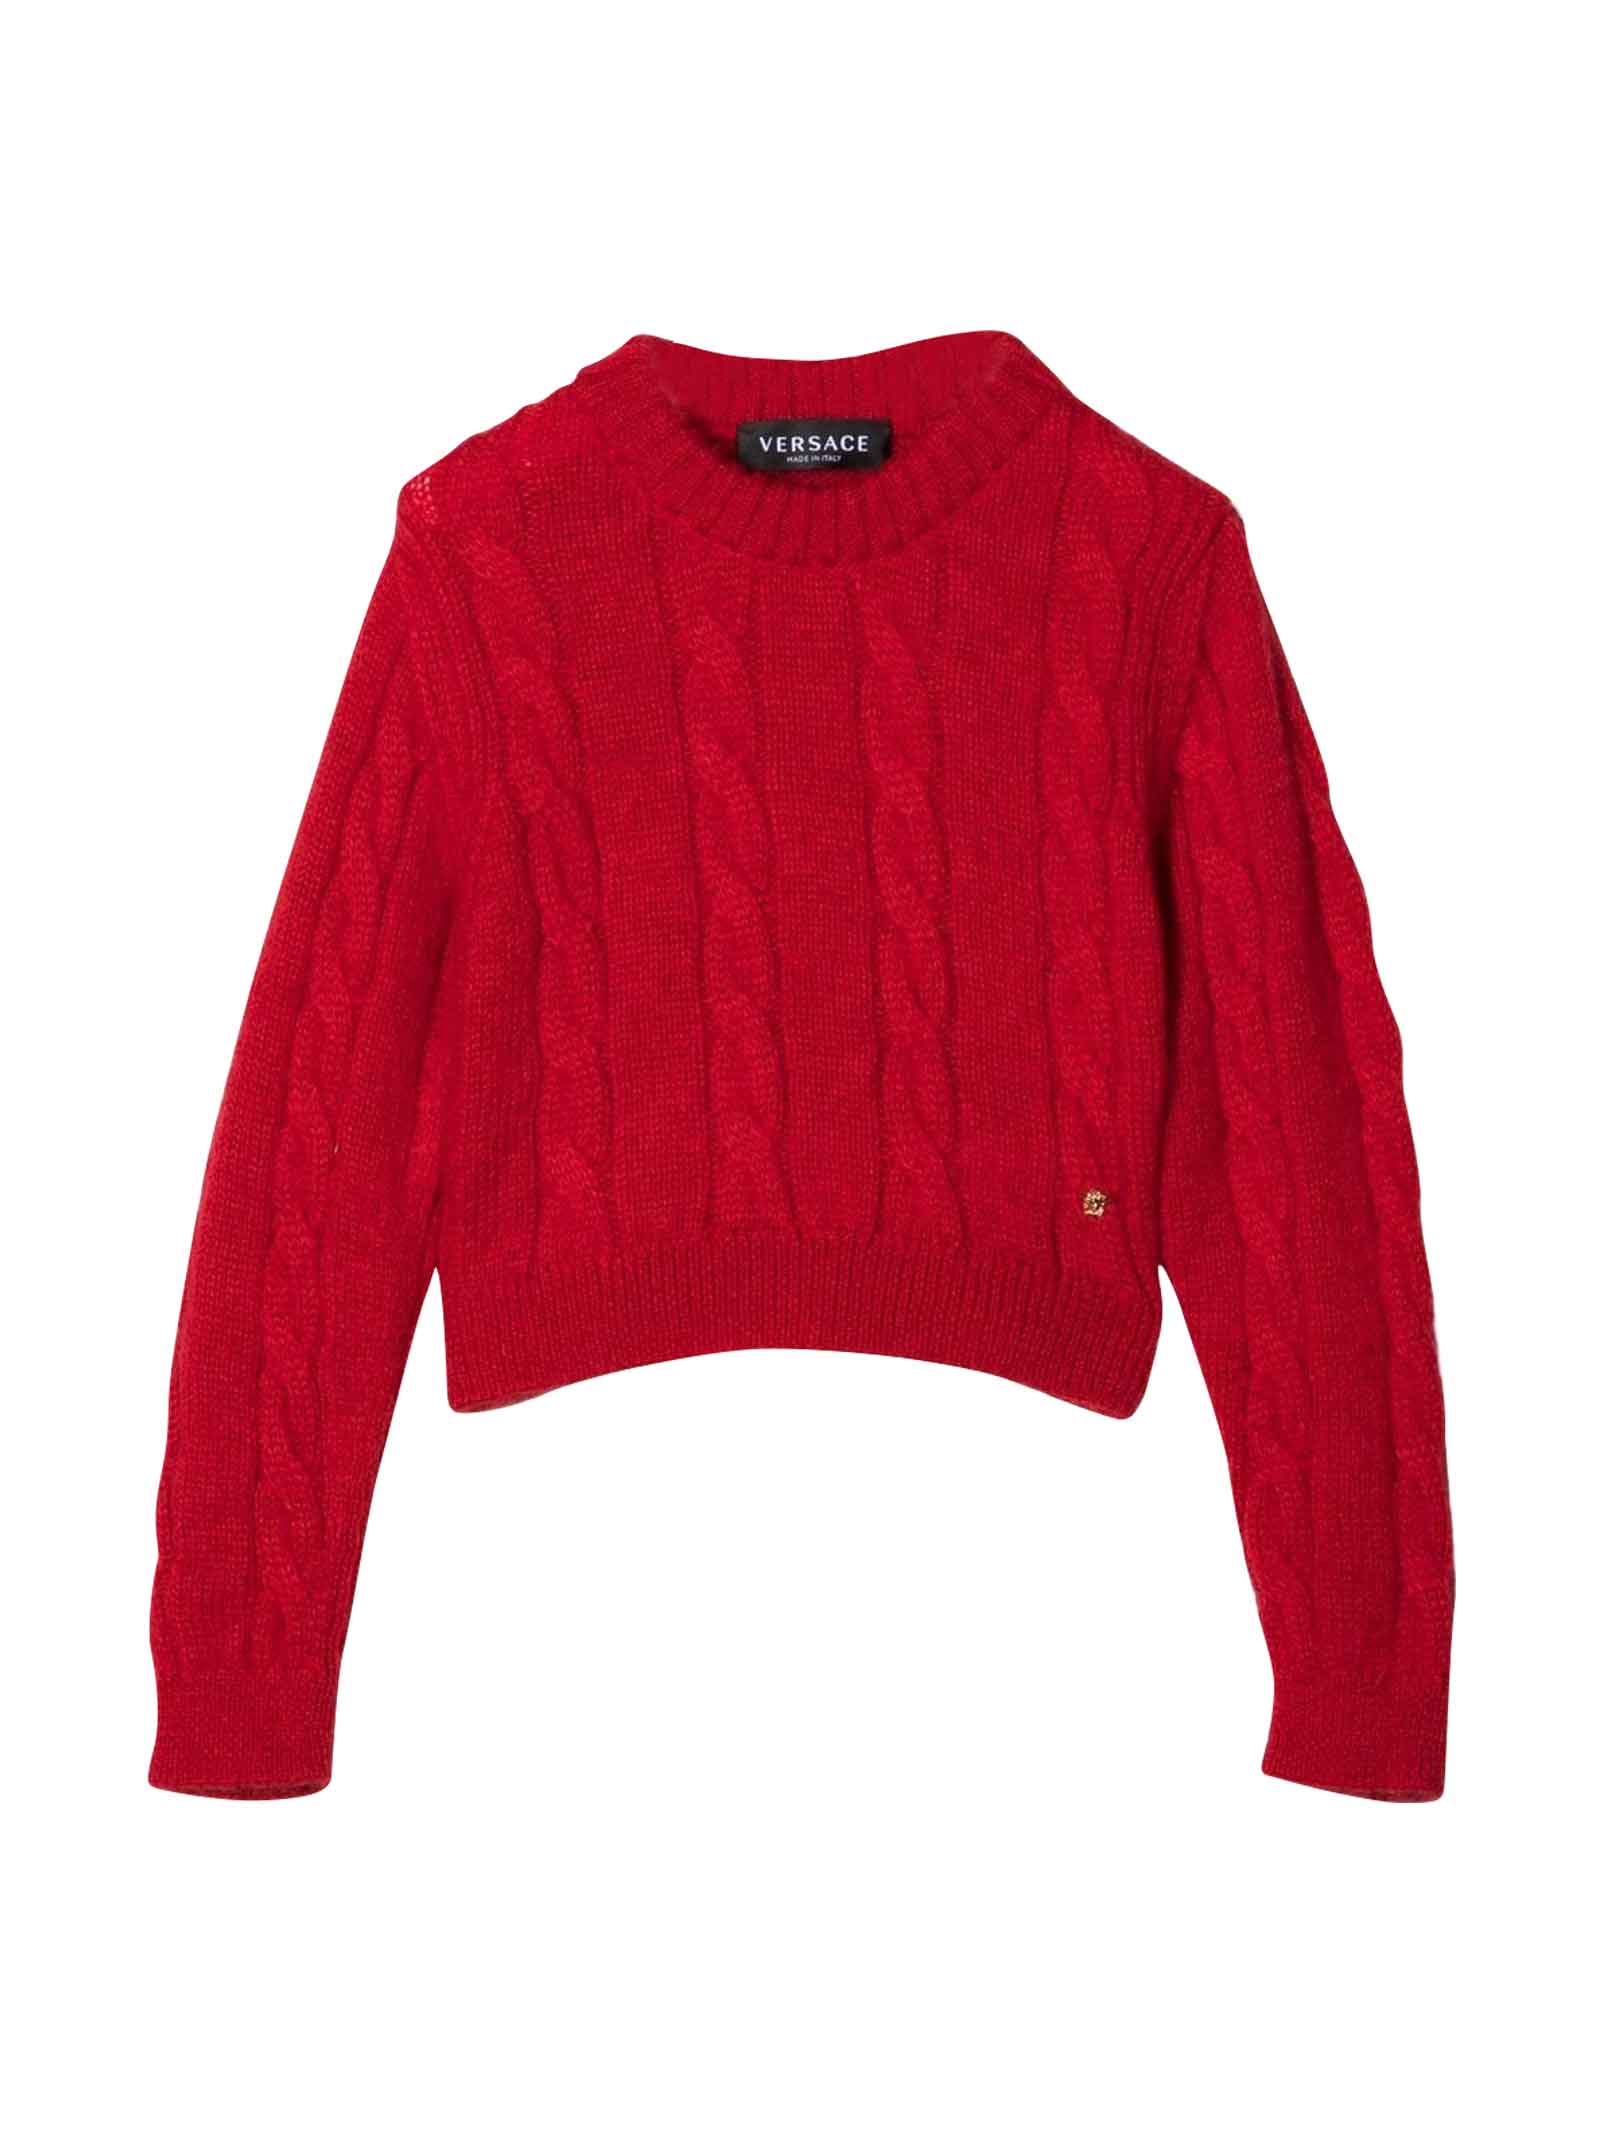 Versace Red Crewneck Sweater Young